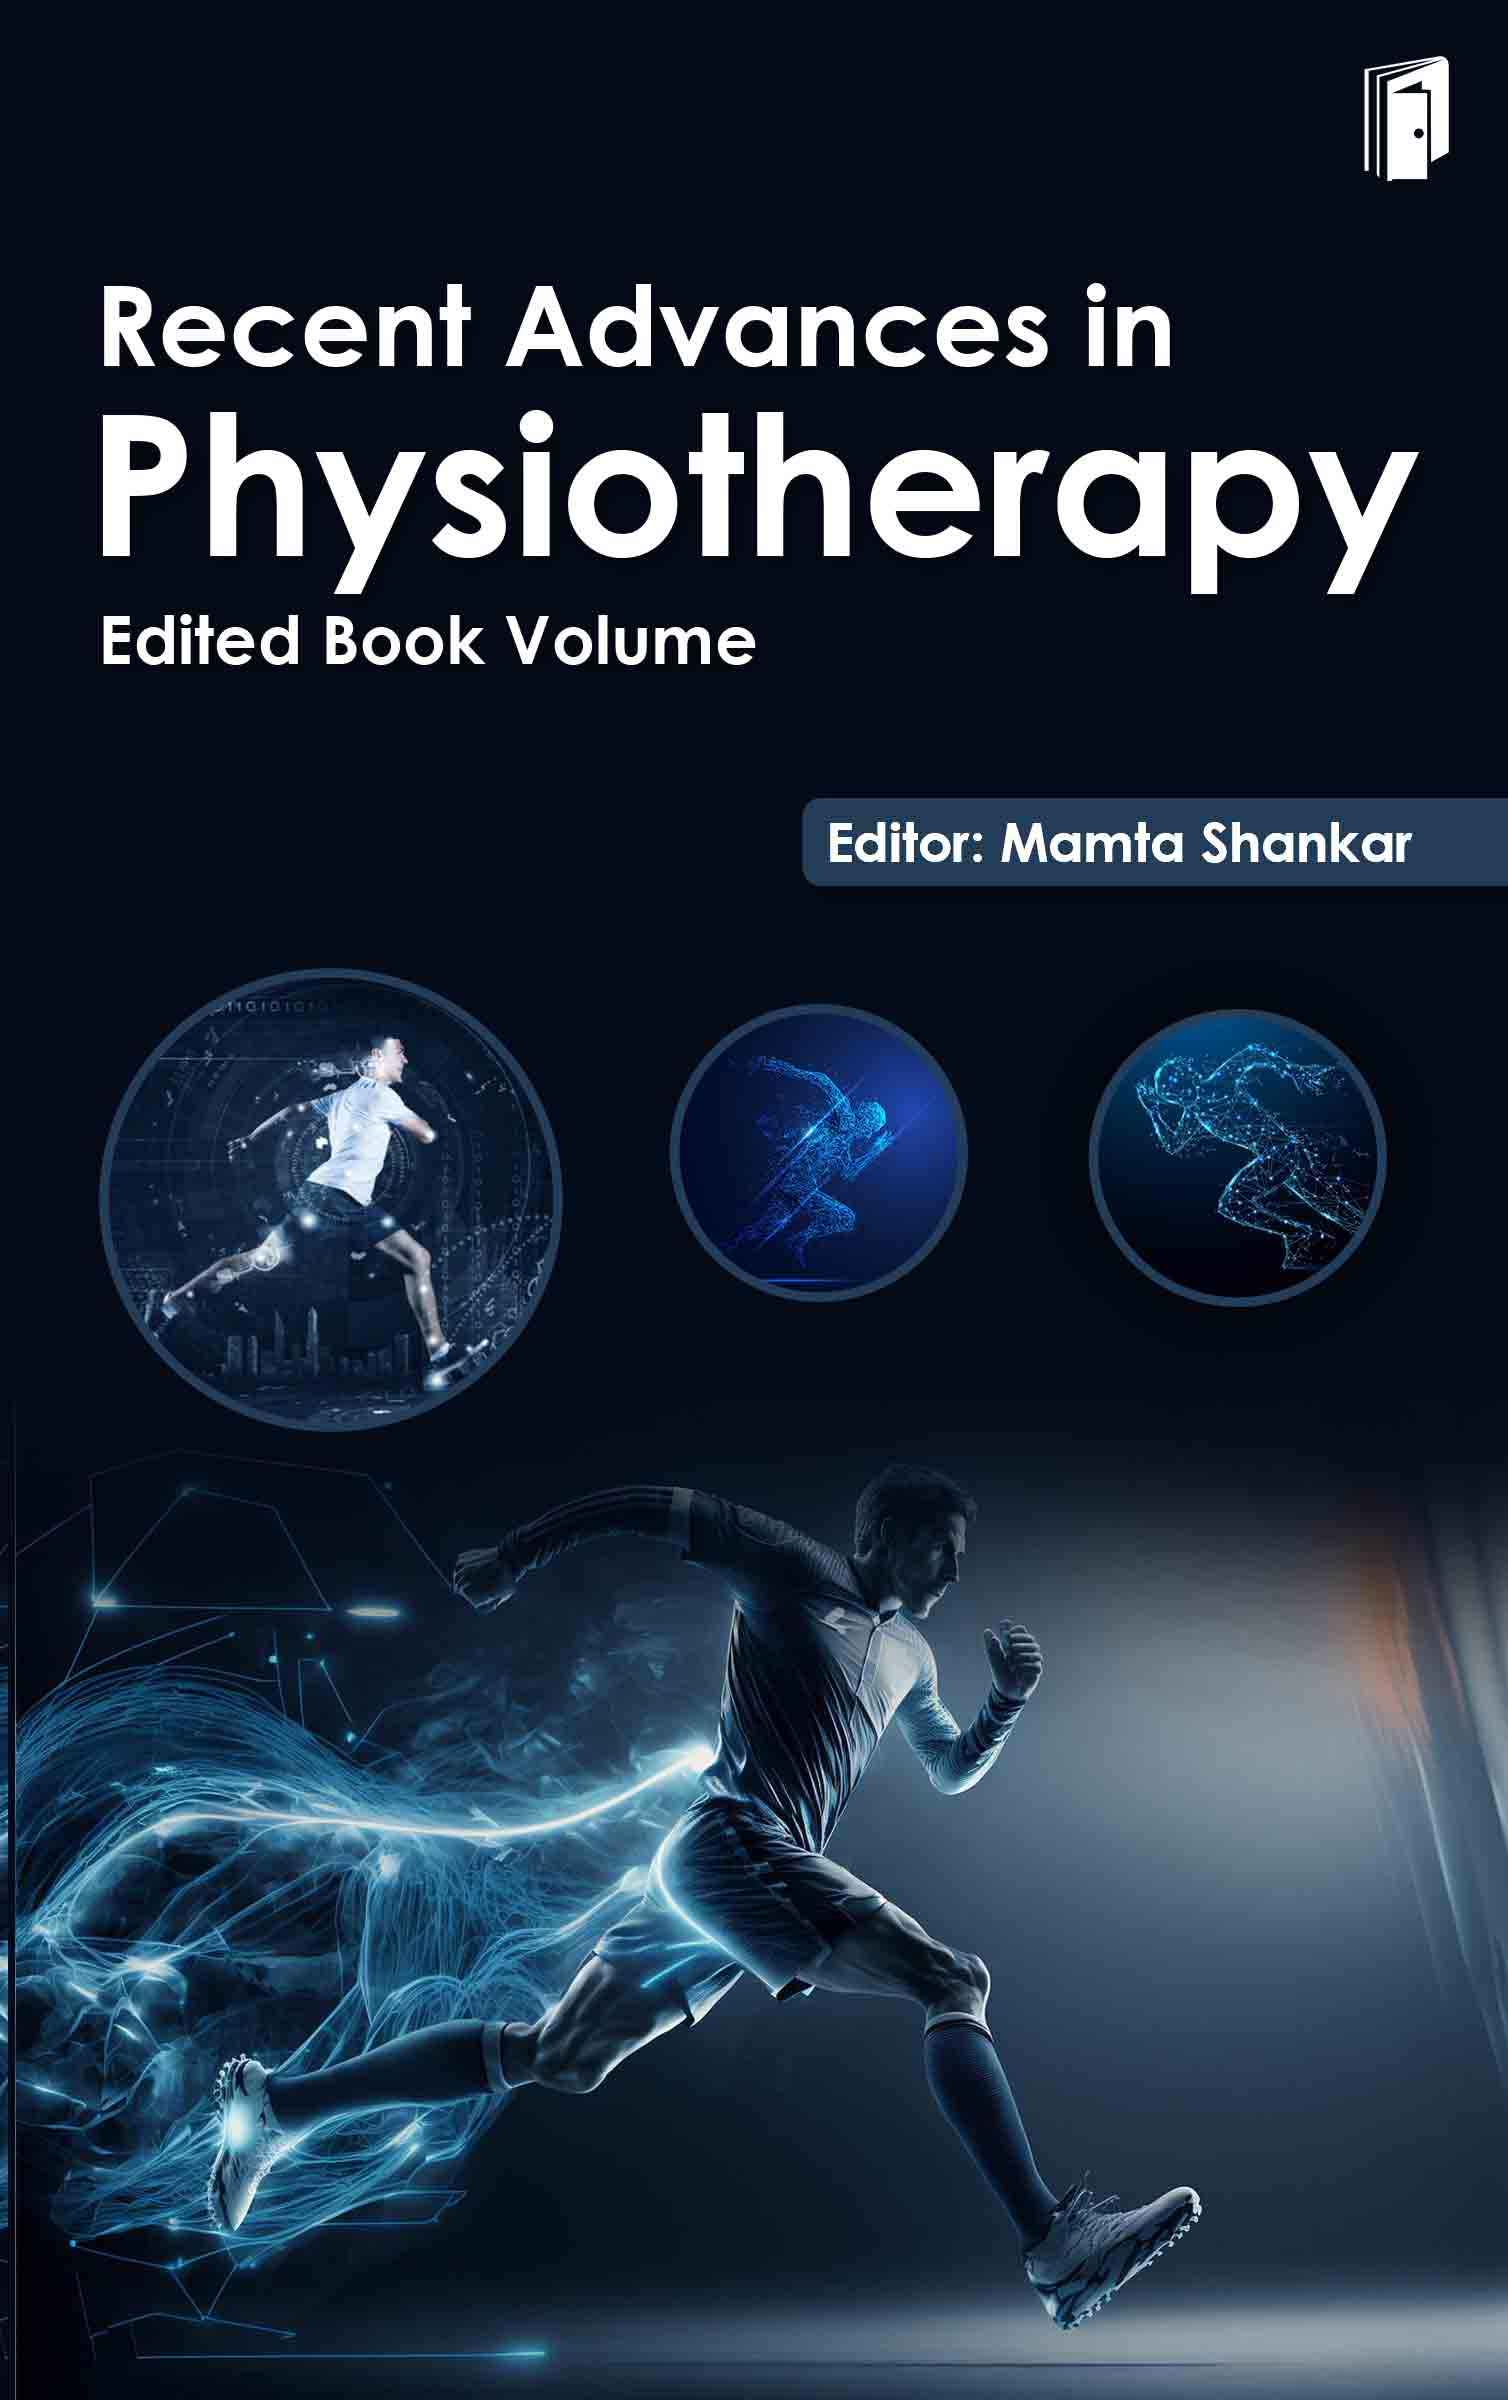 RECENT ADVANCES IN PHYSIOTHERAPY